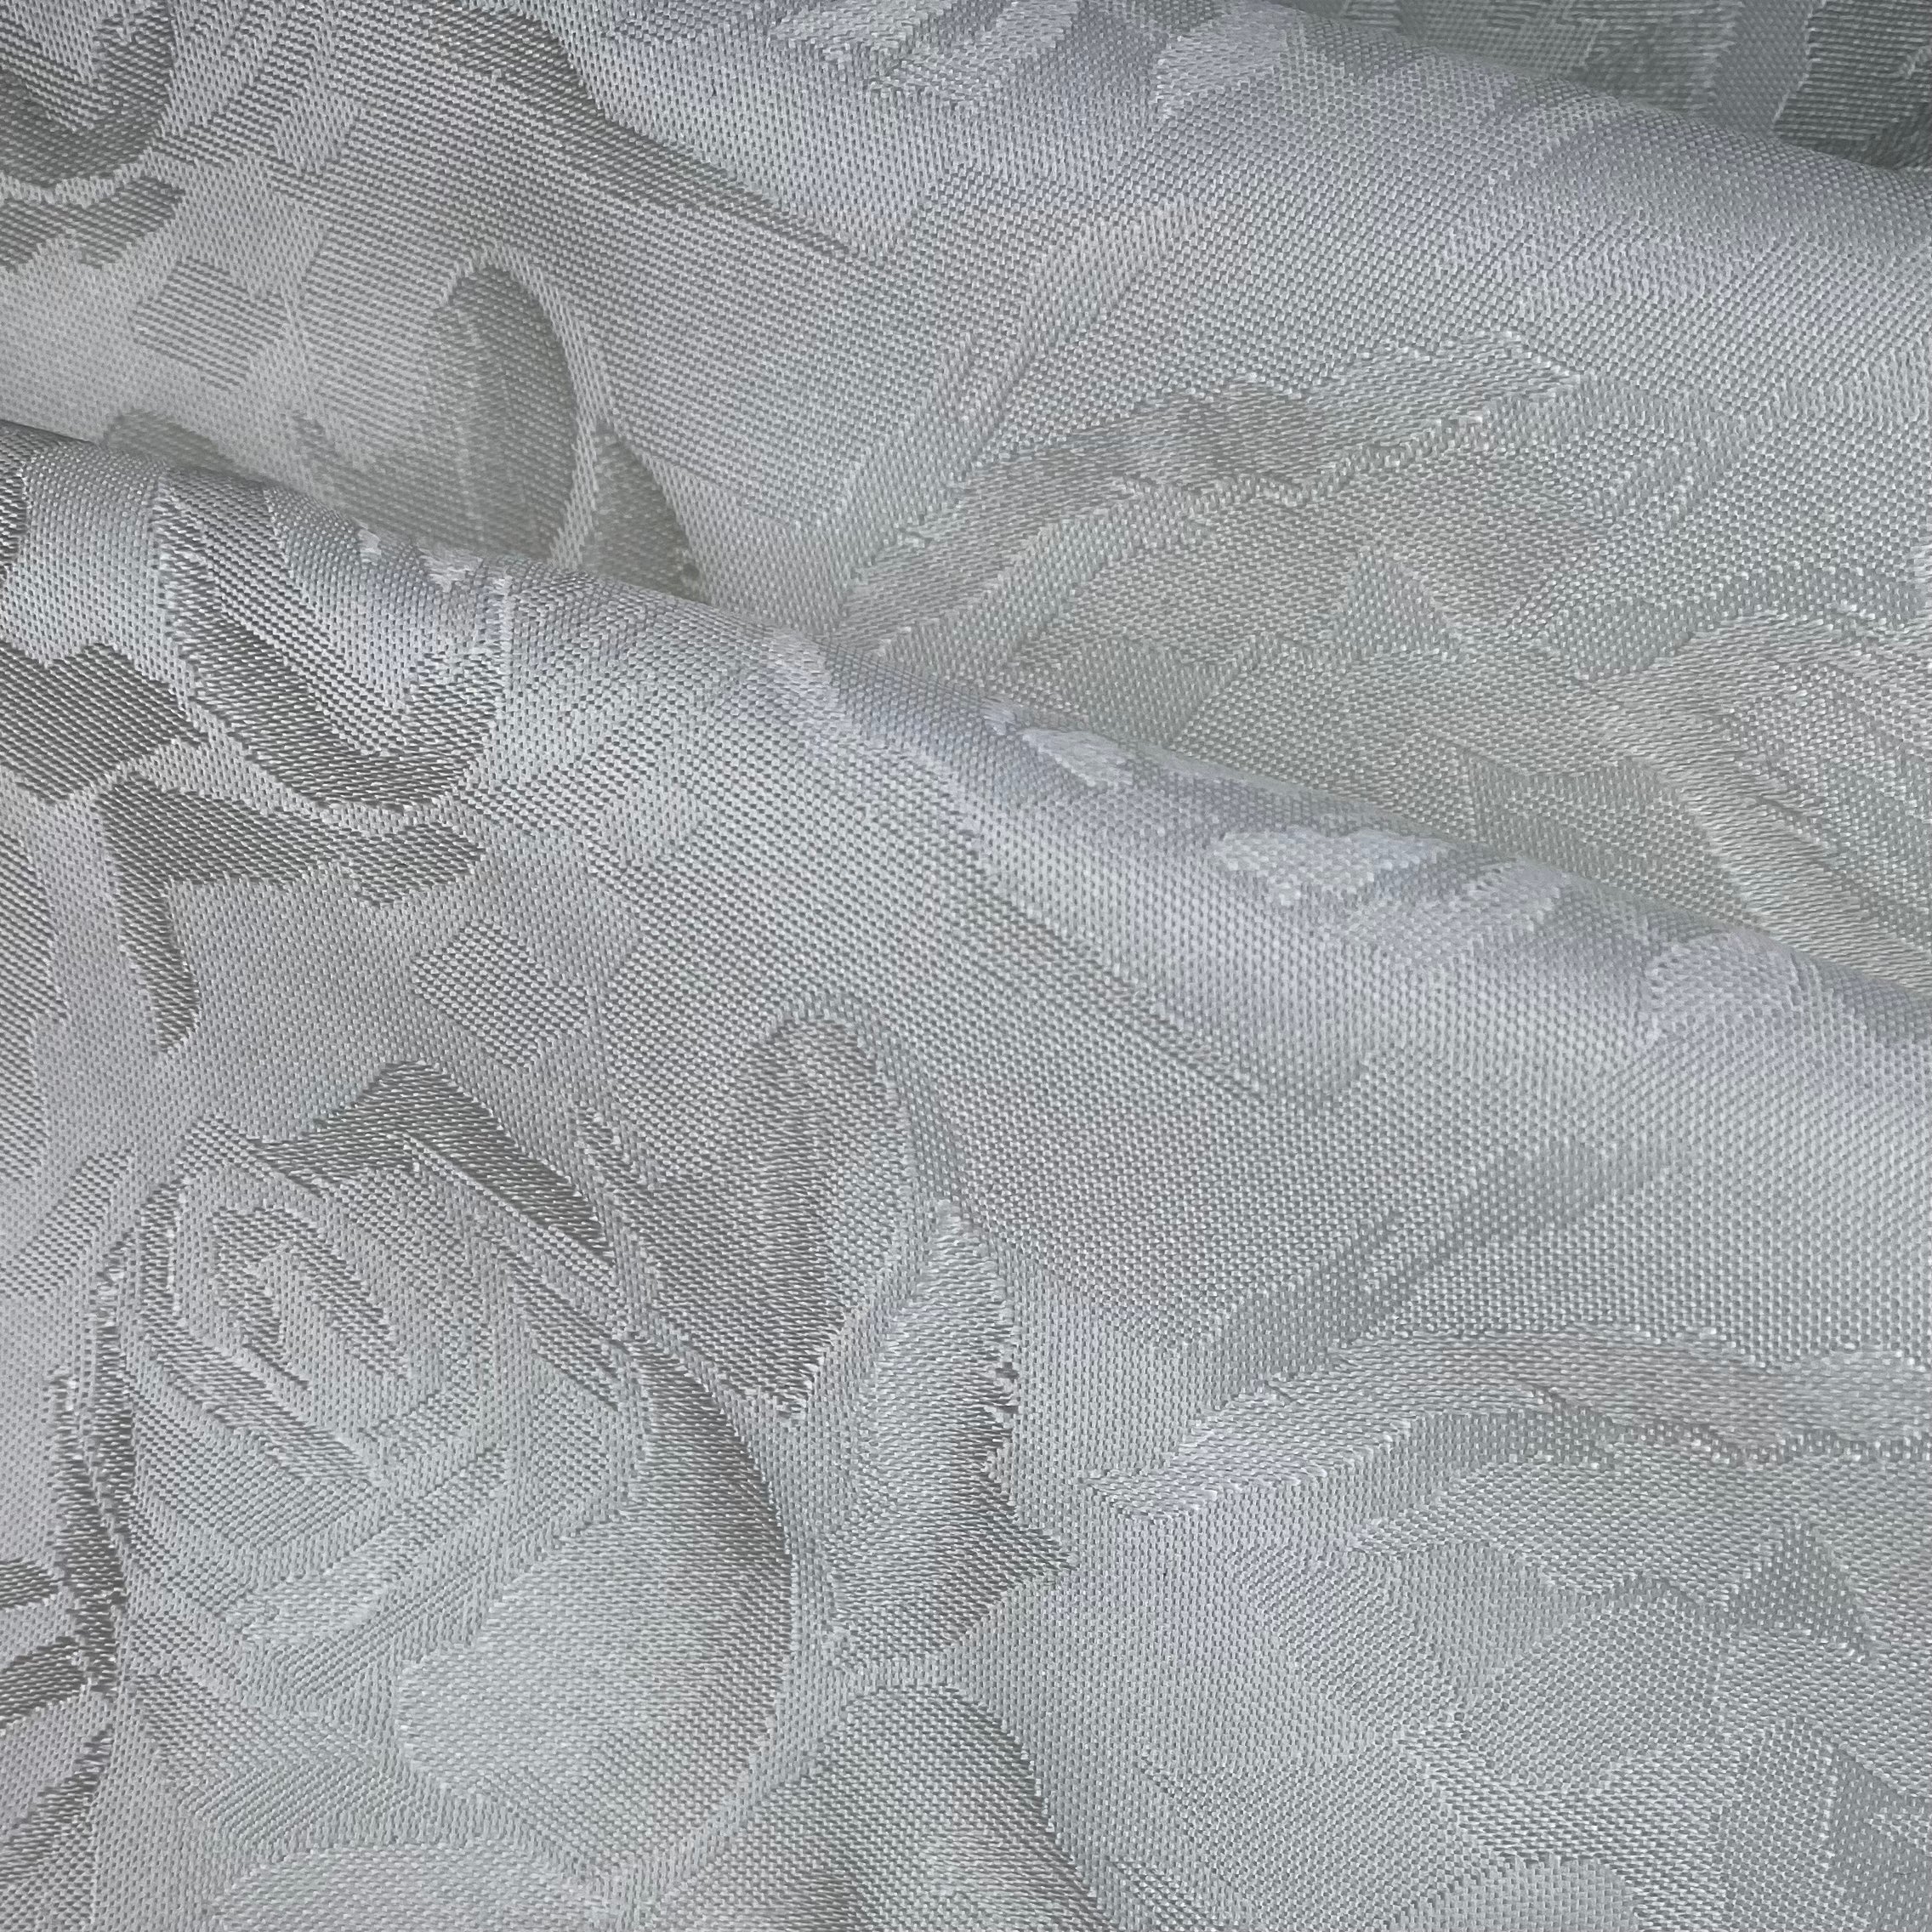 Floral Polyester Brocade - Ivory